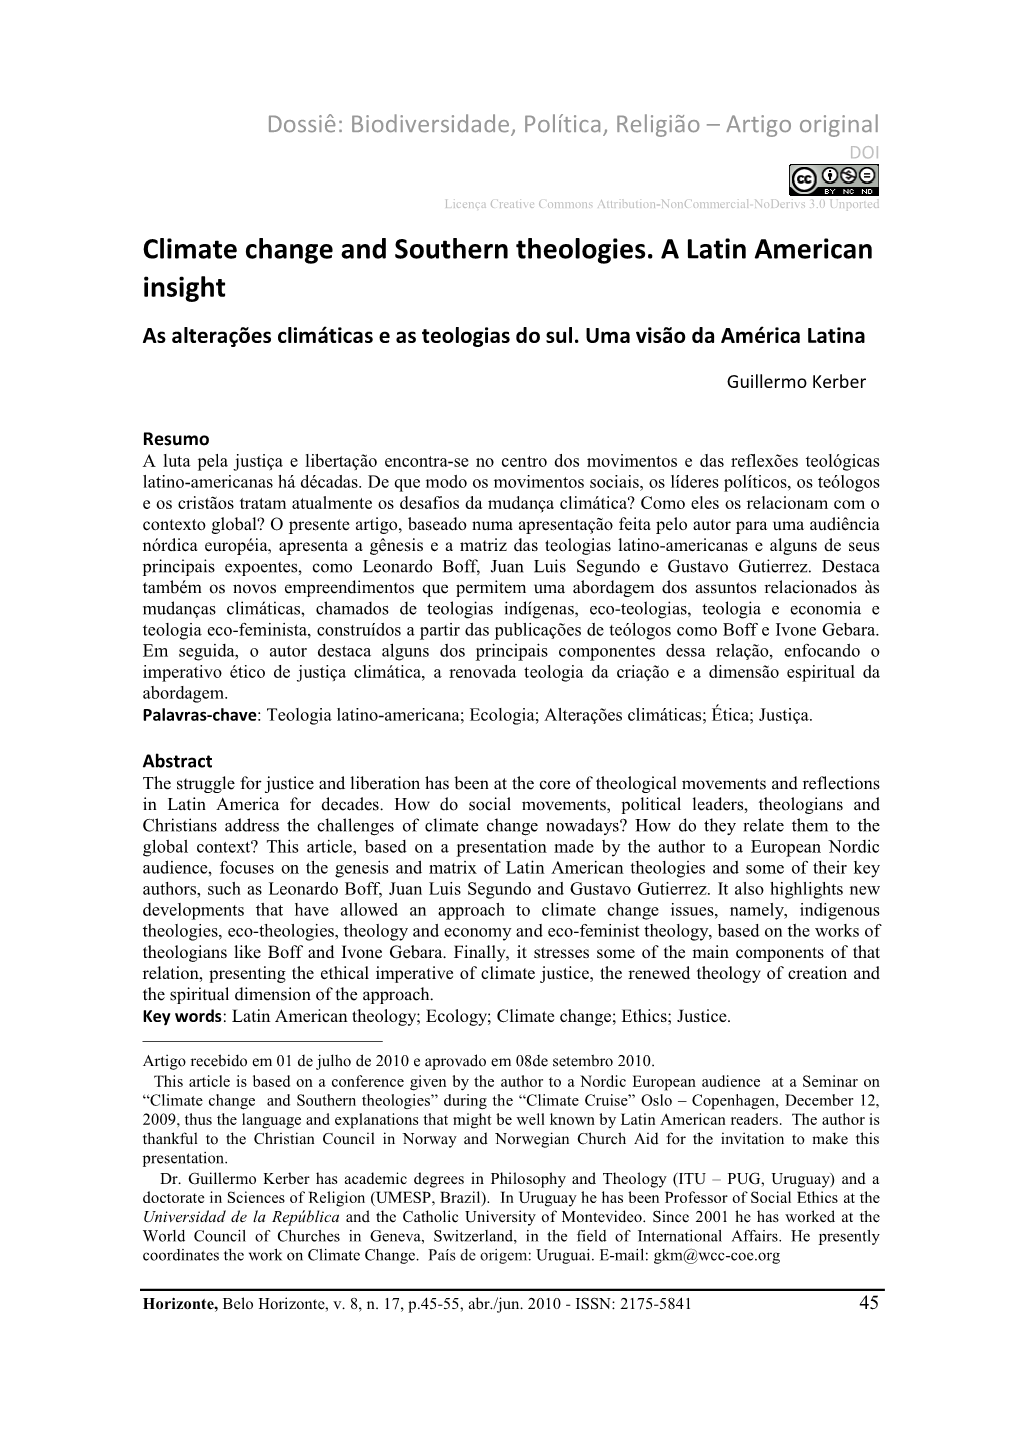 Climate Change and Southern Theologies